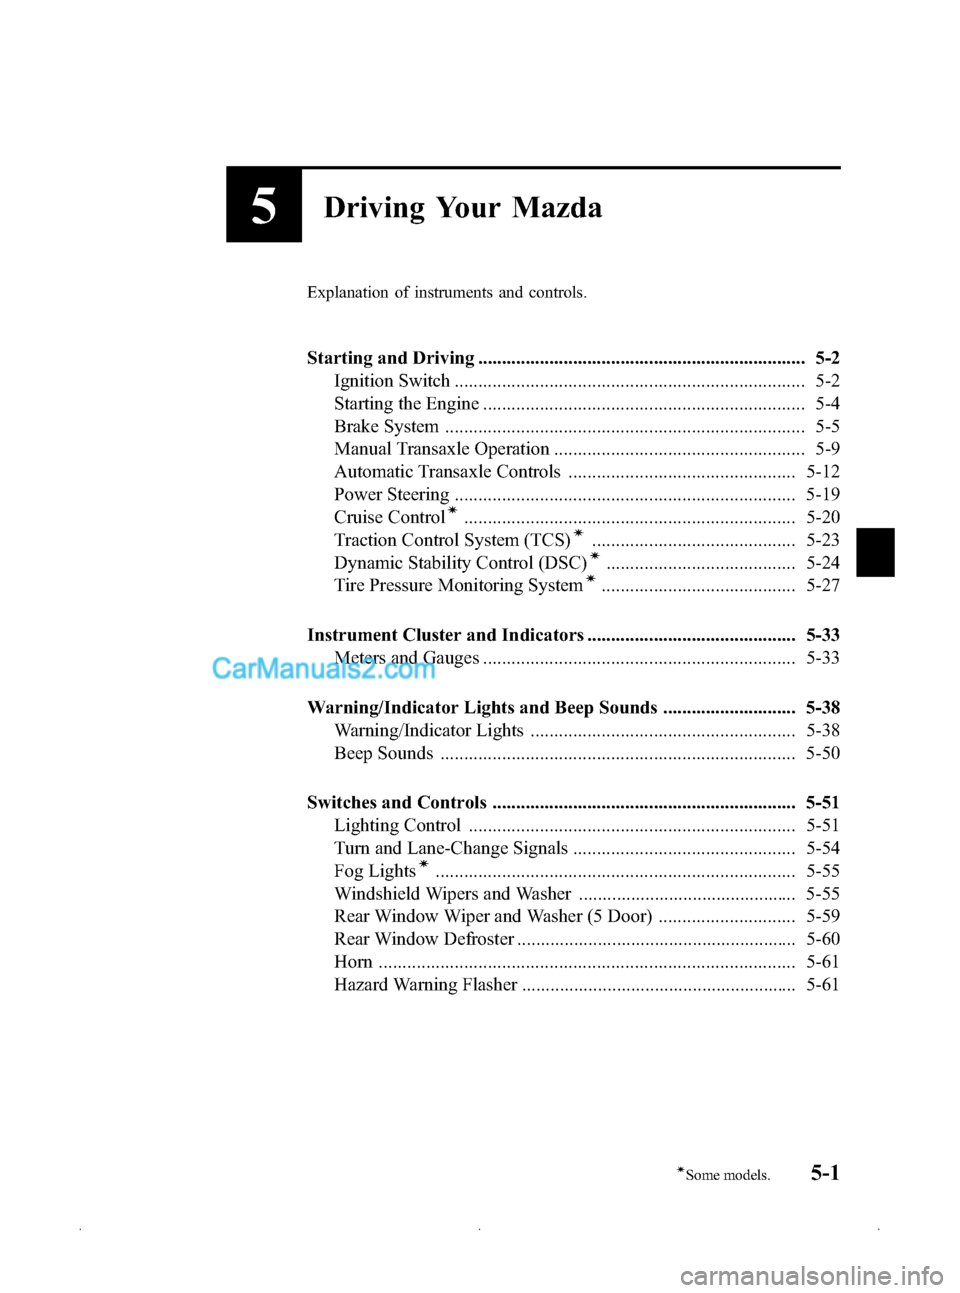 MAZDA MODEL MAZDASPEED 3 2009  Owners Manual (in English) Black plate (123,1)
5Driving Your Mazda
Explanation of instruments and controls.
Starting and Driving ..................................................................... 5-2Ignition Switch .........